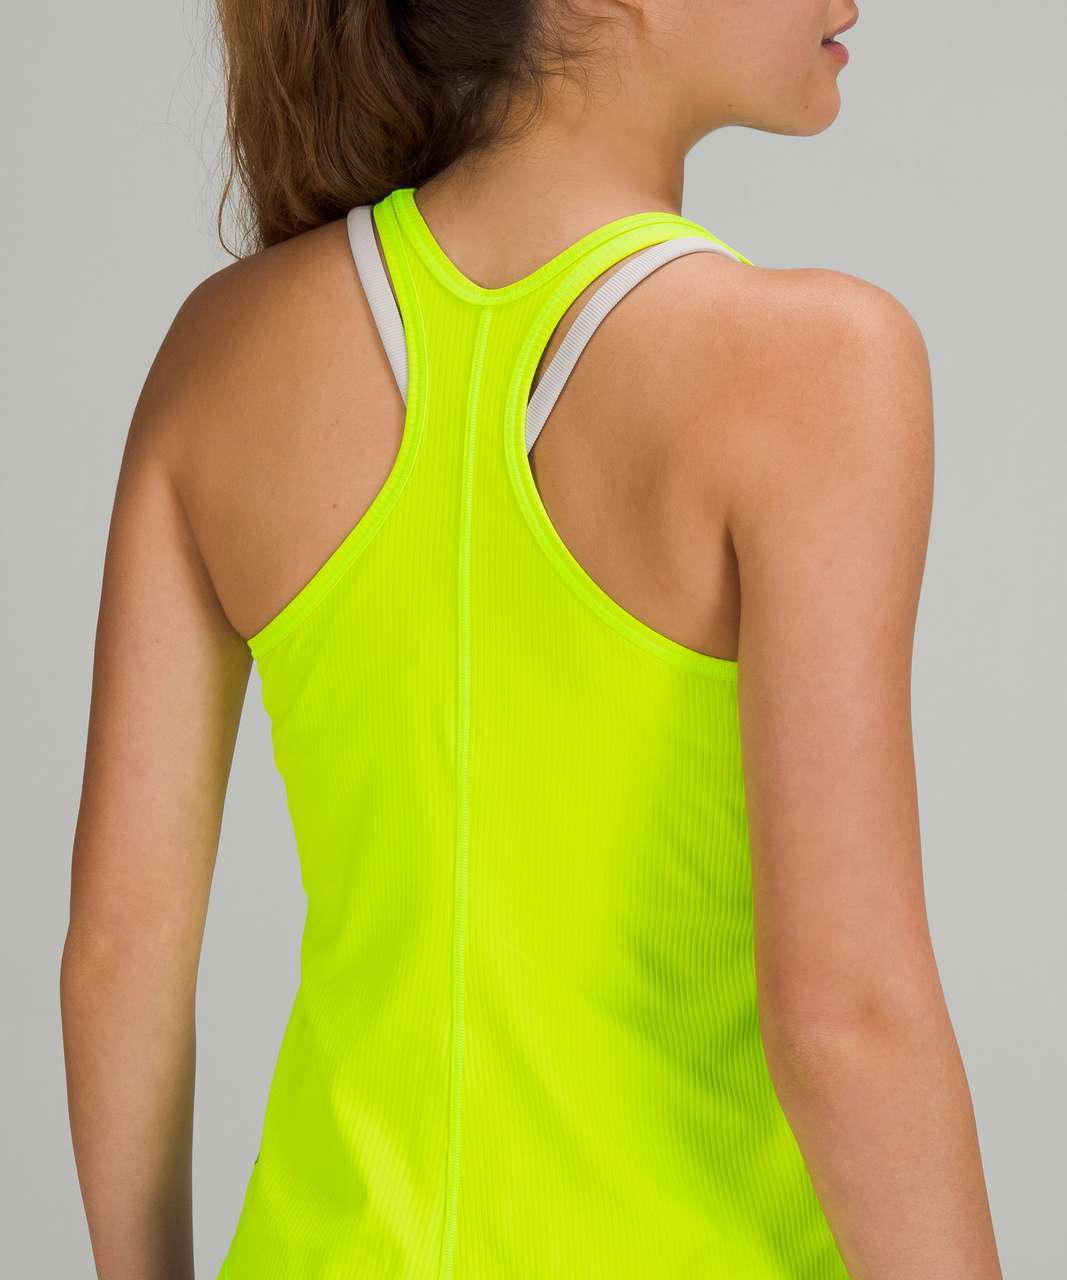 Thrifts In The 321  lululemon align tank drop⚡️ electric yellow